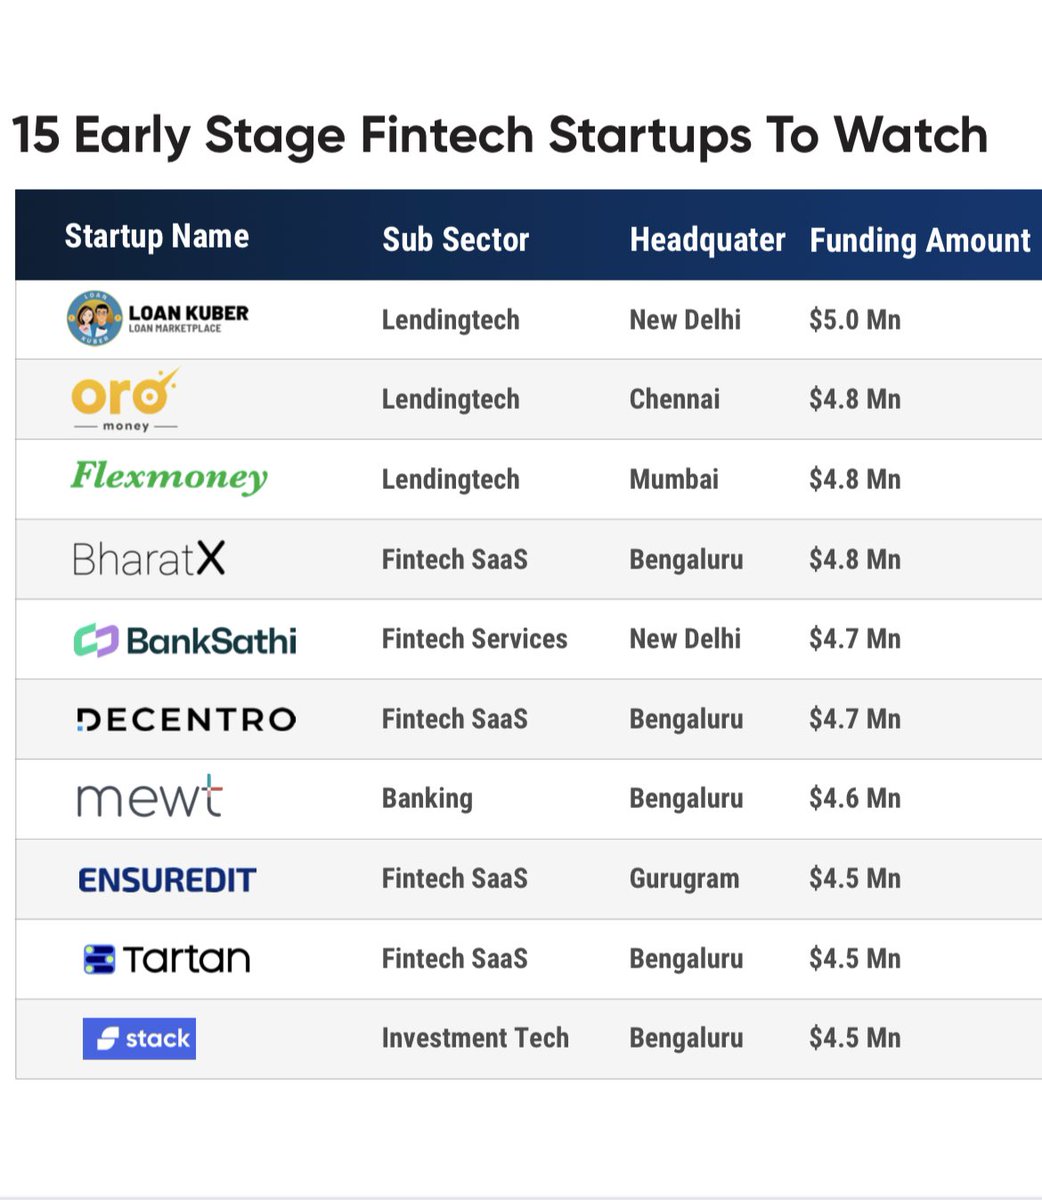 My favourite app #BankSathi @banksathi1 featured in @Inc42 STATE OF THE INDIAN FINTECH REPORT Q1/2023 under 15 Early Stage Fintech Startups To Watch

Congratulations @jitendra_dhaka1 and team banksathi 

#Fintech #startup #inc42